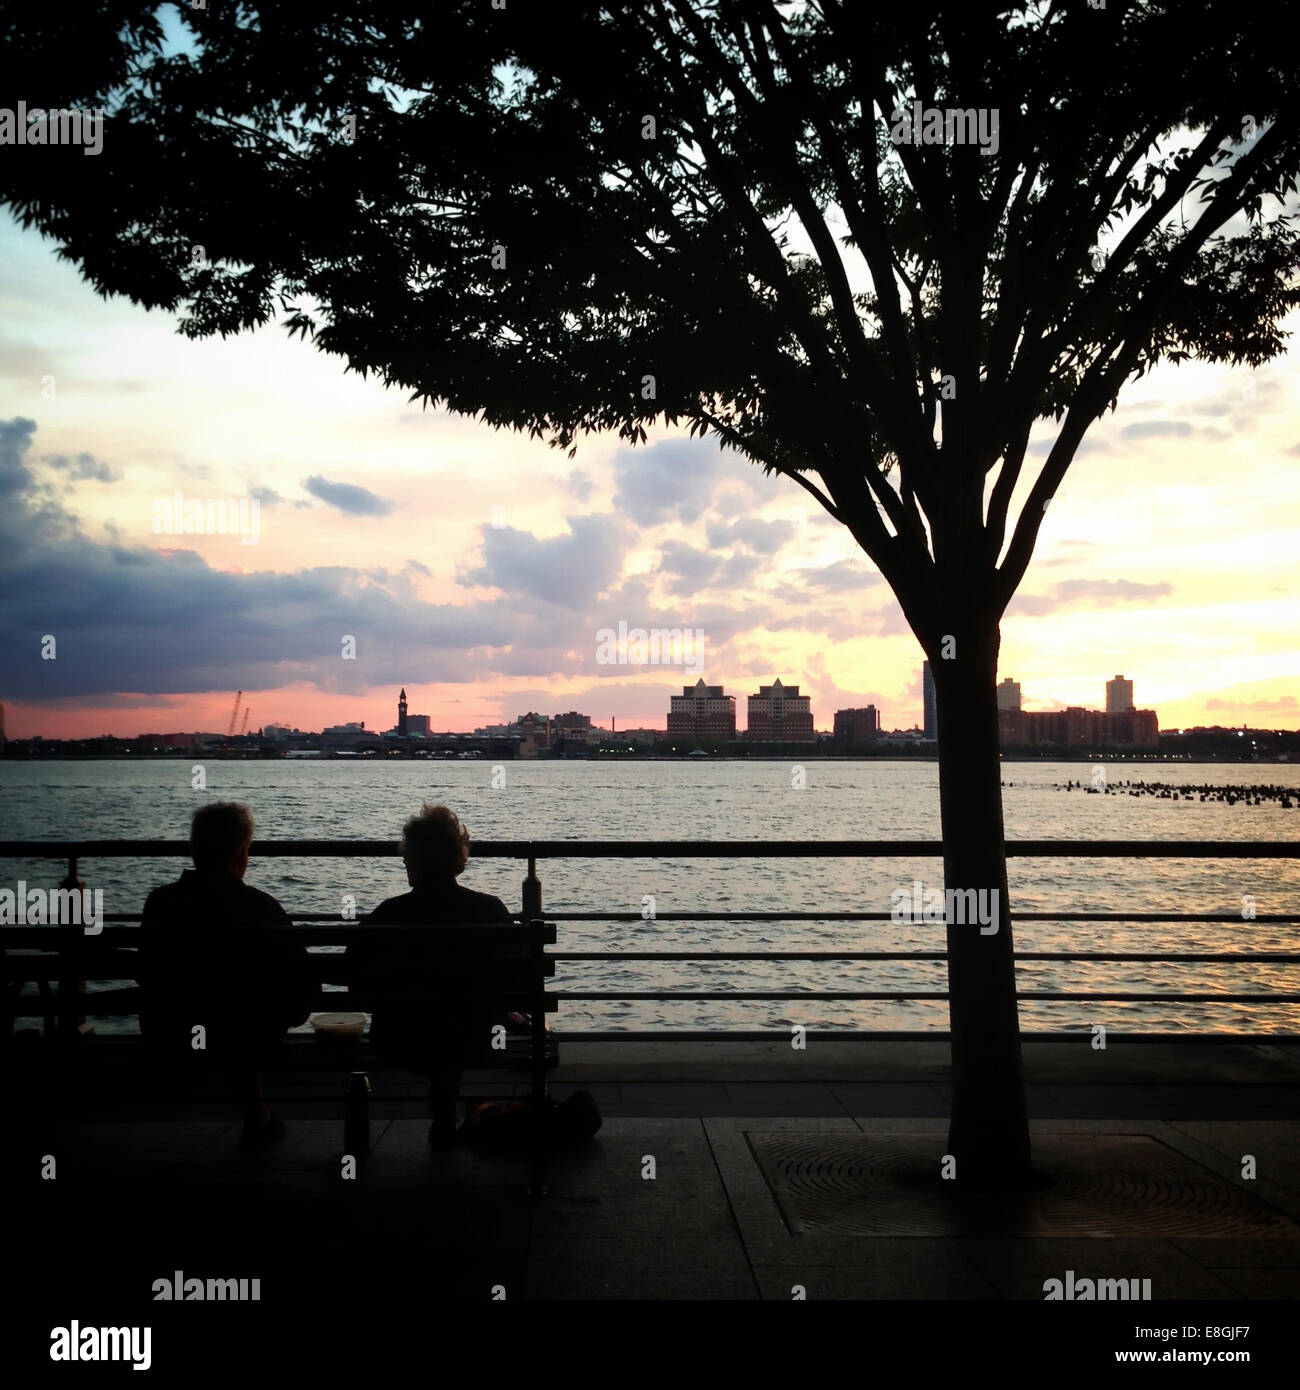 USA, New York State, New York City, Couple sitting on bench at sunset Stock Photo